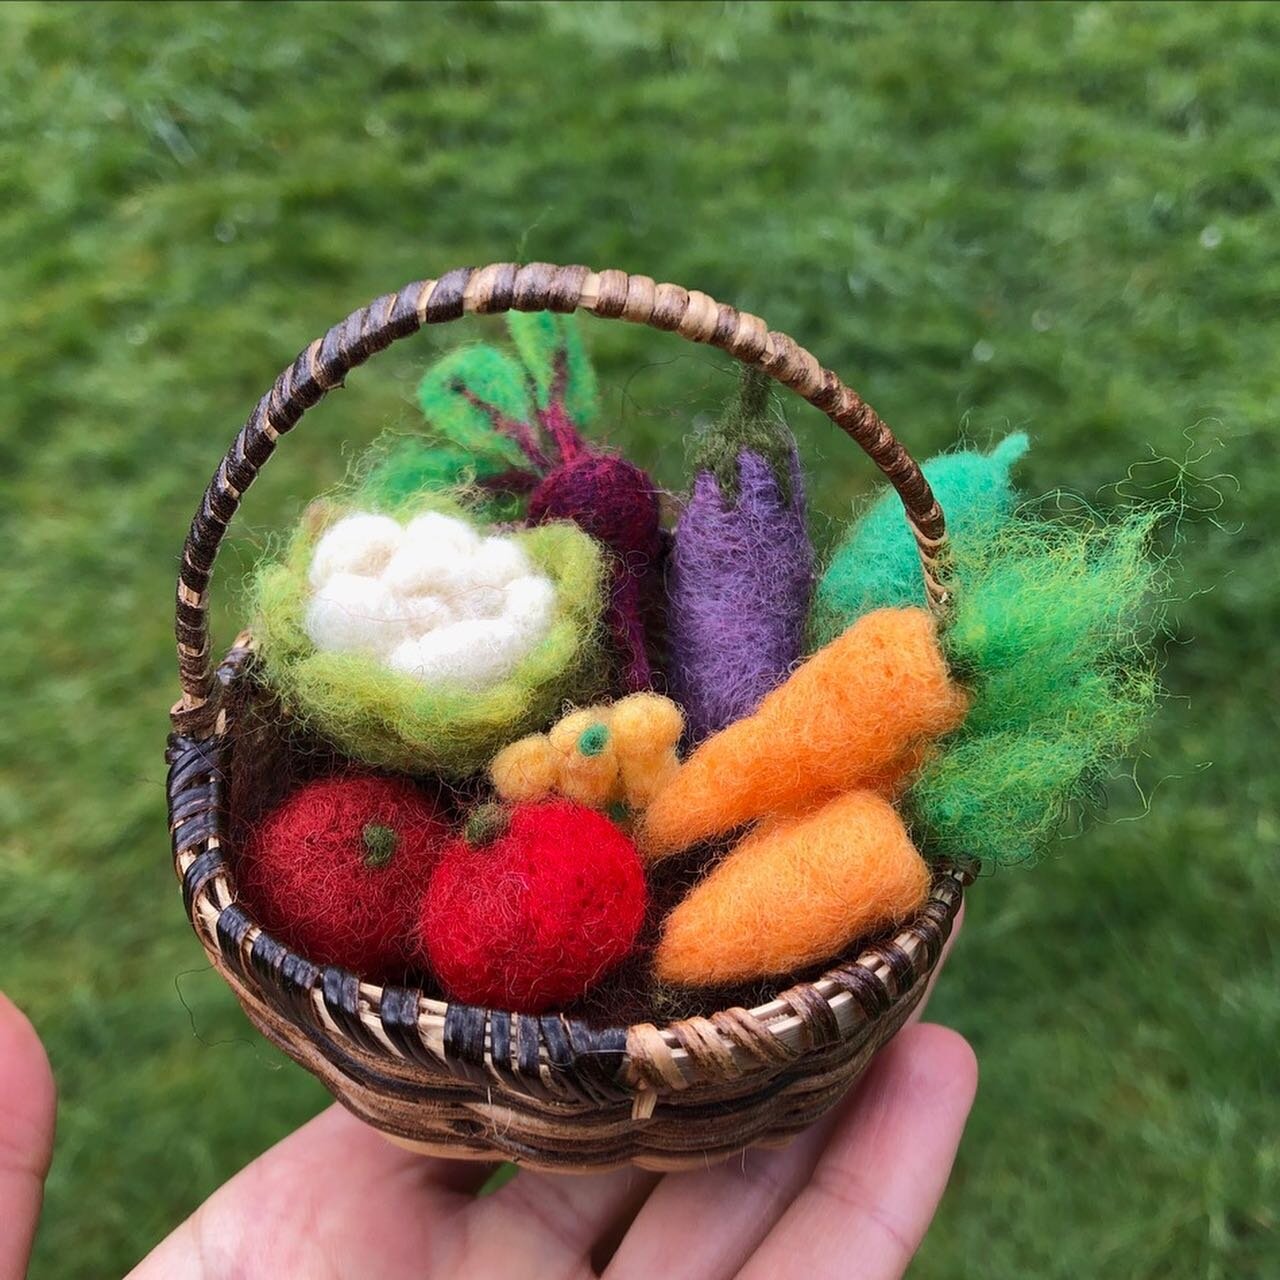 🥕APRIL FELTING WORKSHOPS 🥕

4/13 INTRO TO NEEDLE FELTING - Spring Lambs
4/21 Learn to Felt Animals - Bunny Rabbit Felting
4/28 April FELT CLUB - Mini Harvest Basket

Yowza, March&rsquo;s felting workshops sold out lickety split! It has been very fu